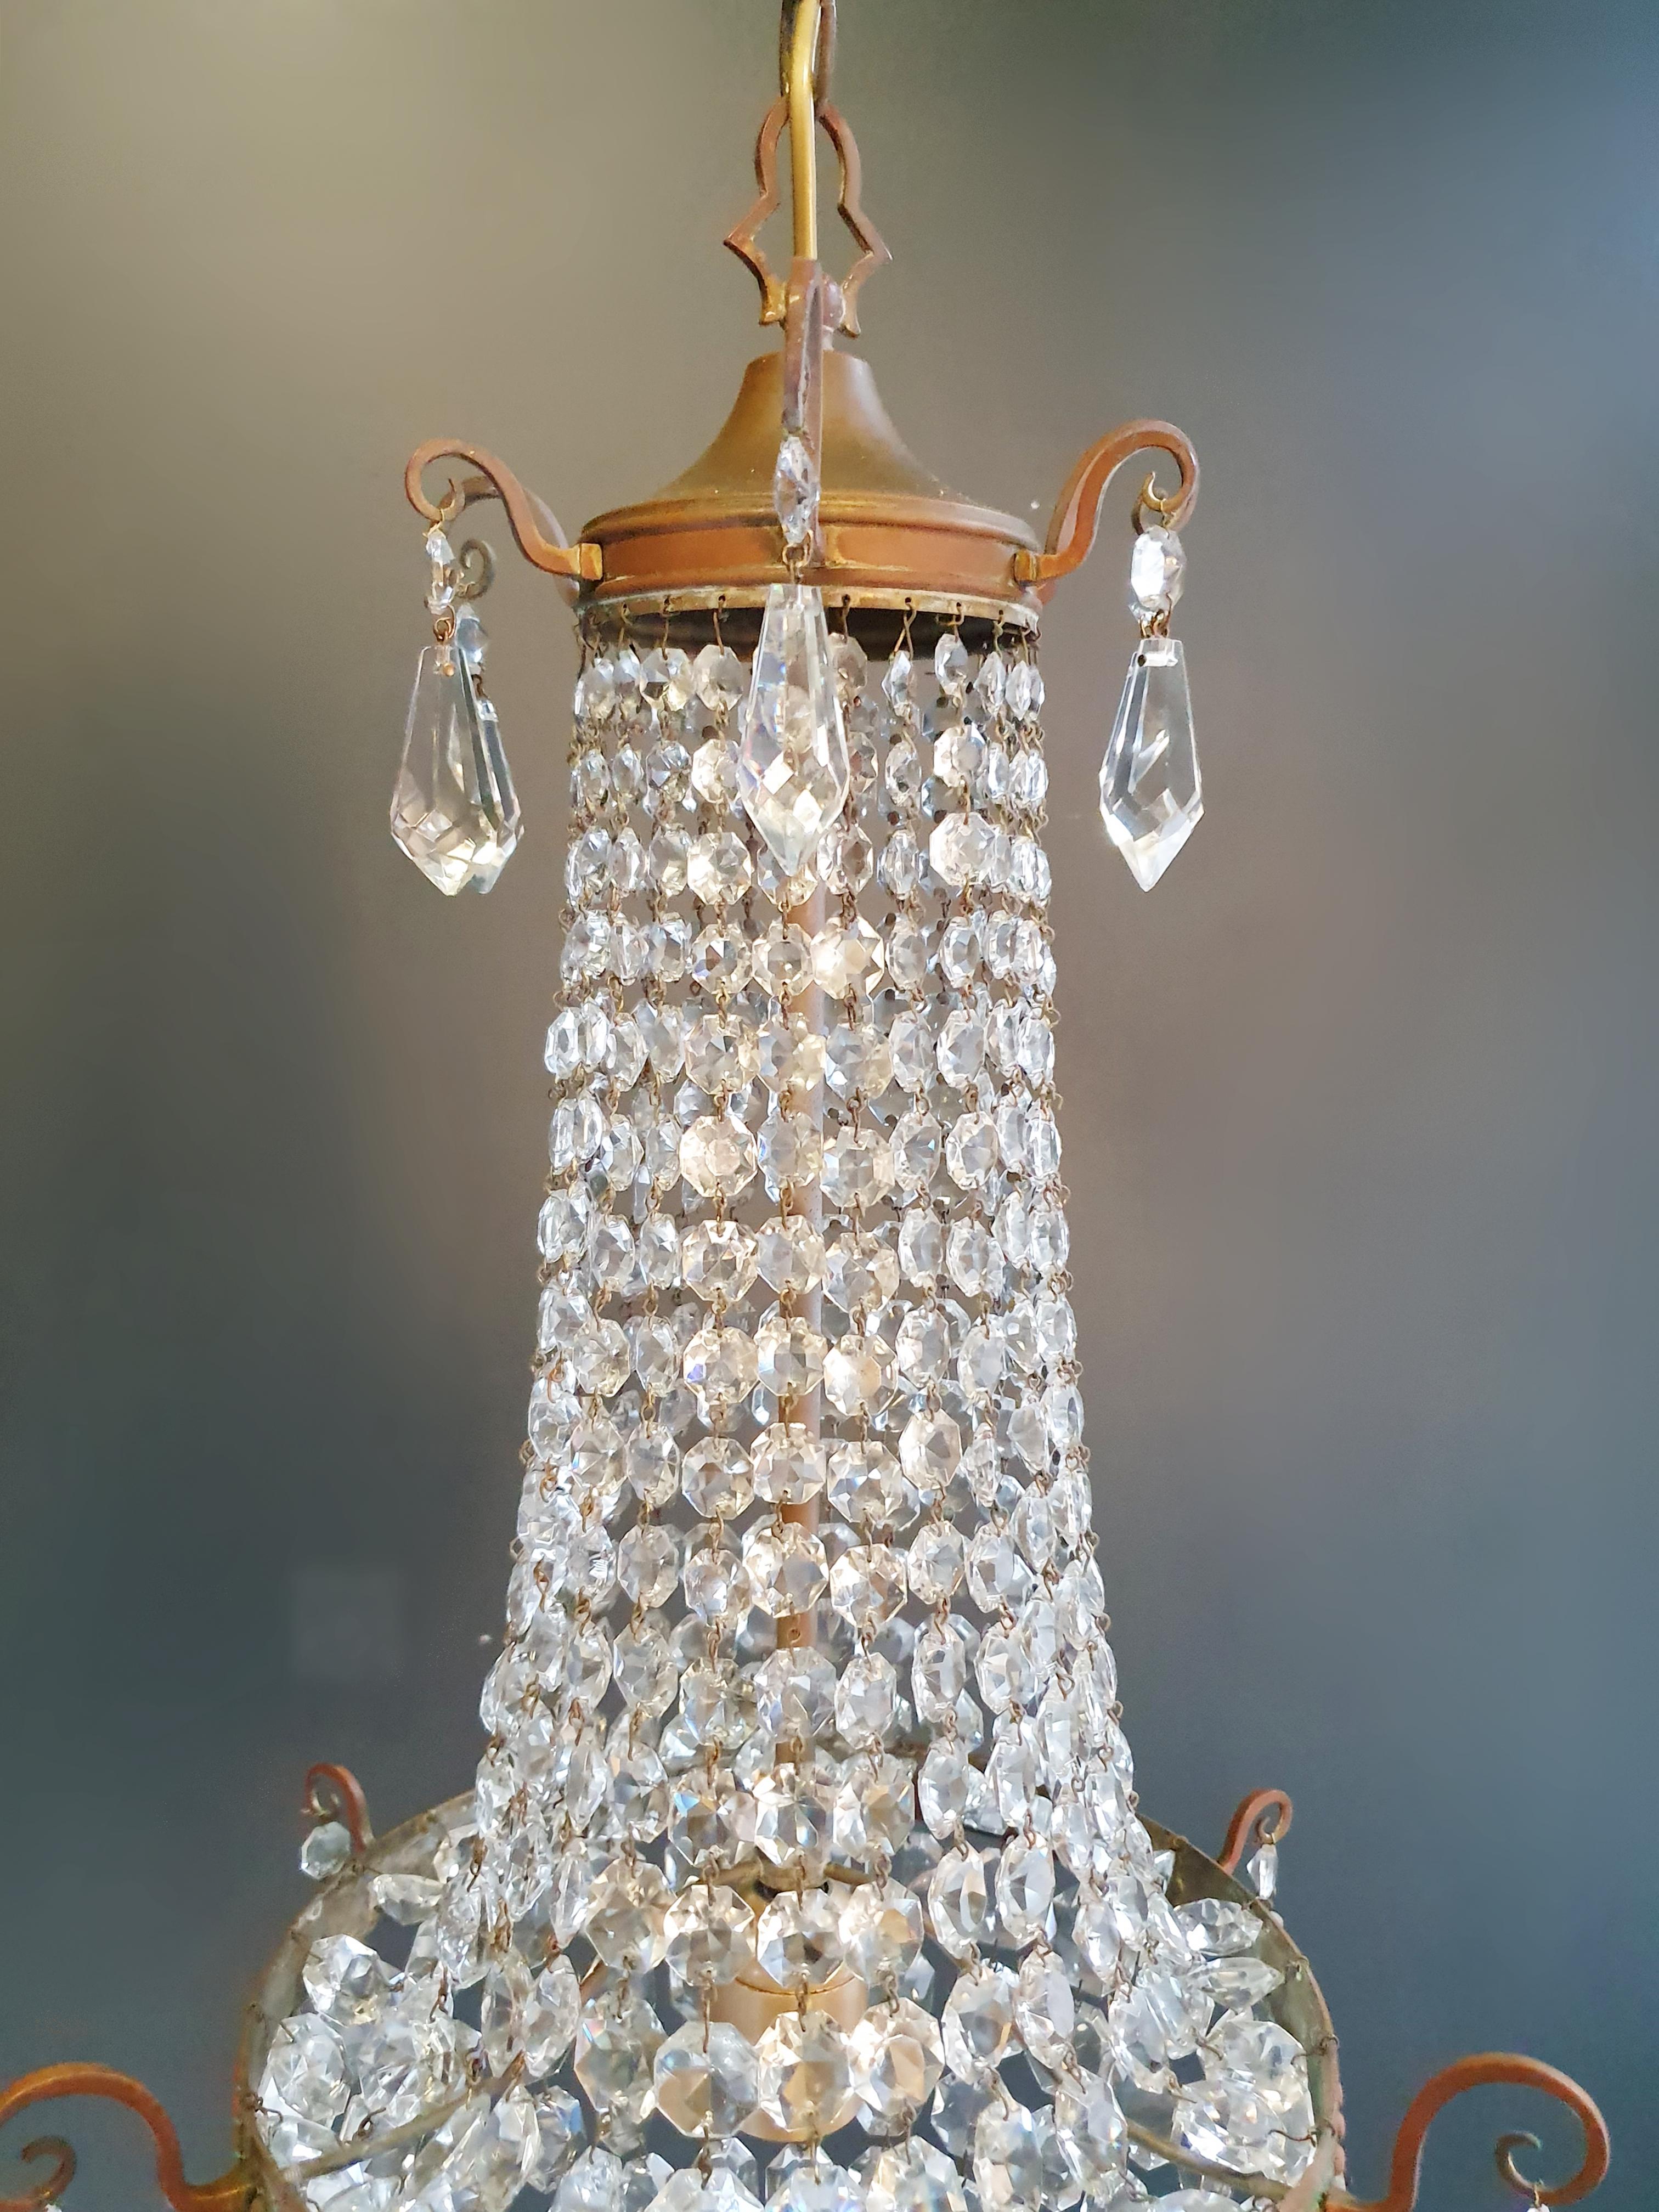 Hand-Knotted Fine Brass Empire Sac a Pearl Chandelier Crystal Lustre Ceiling Lamp Antique